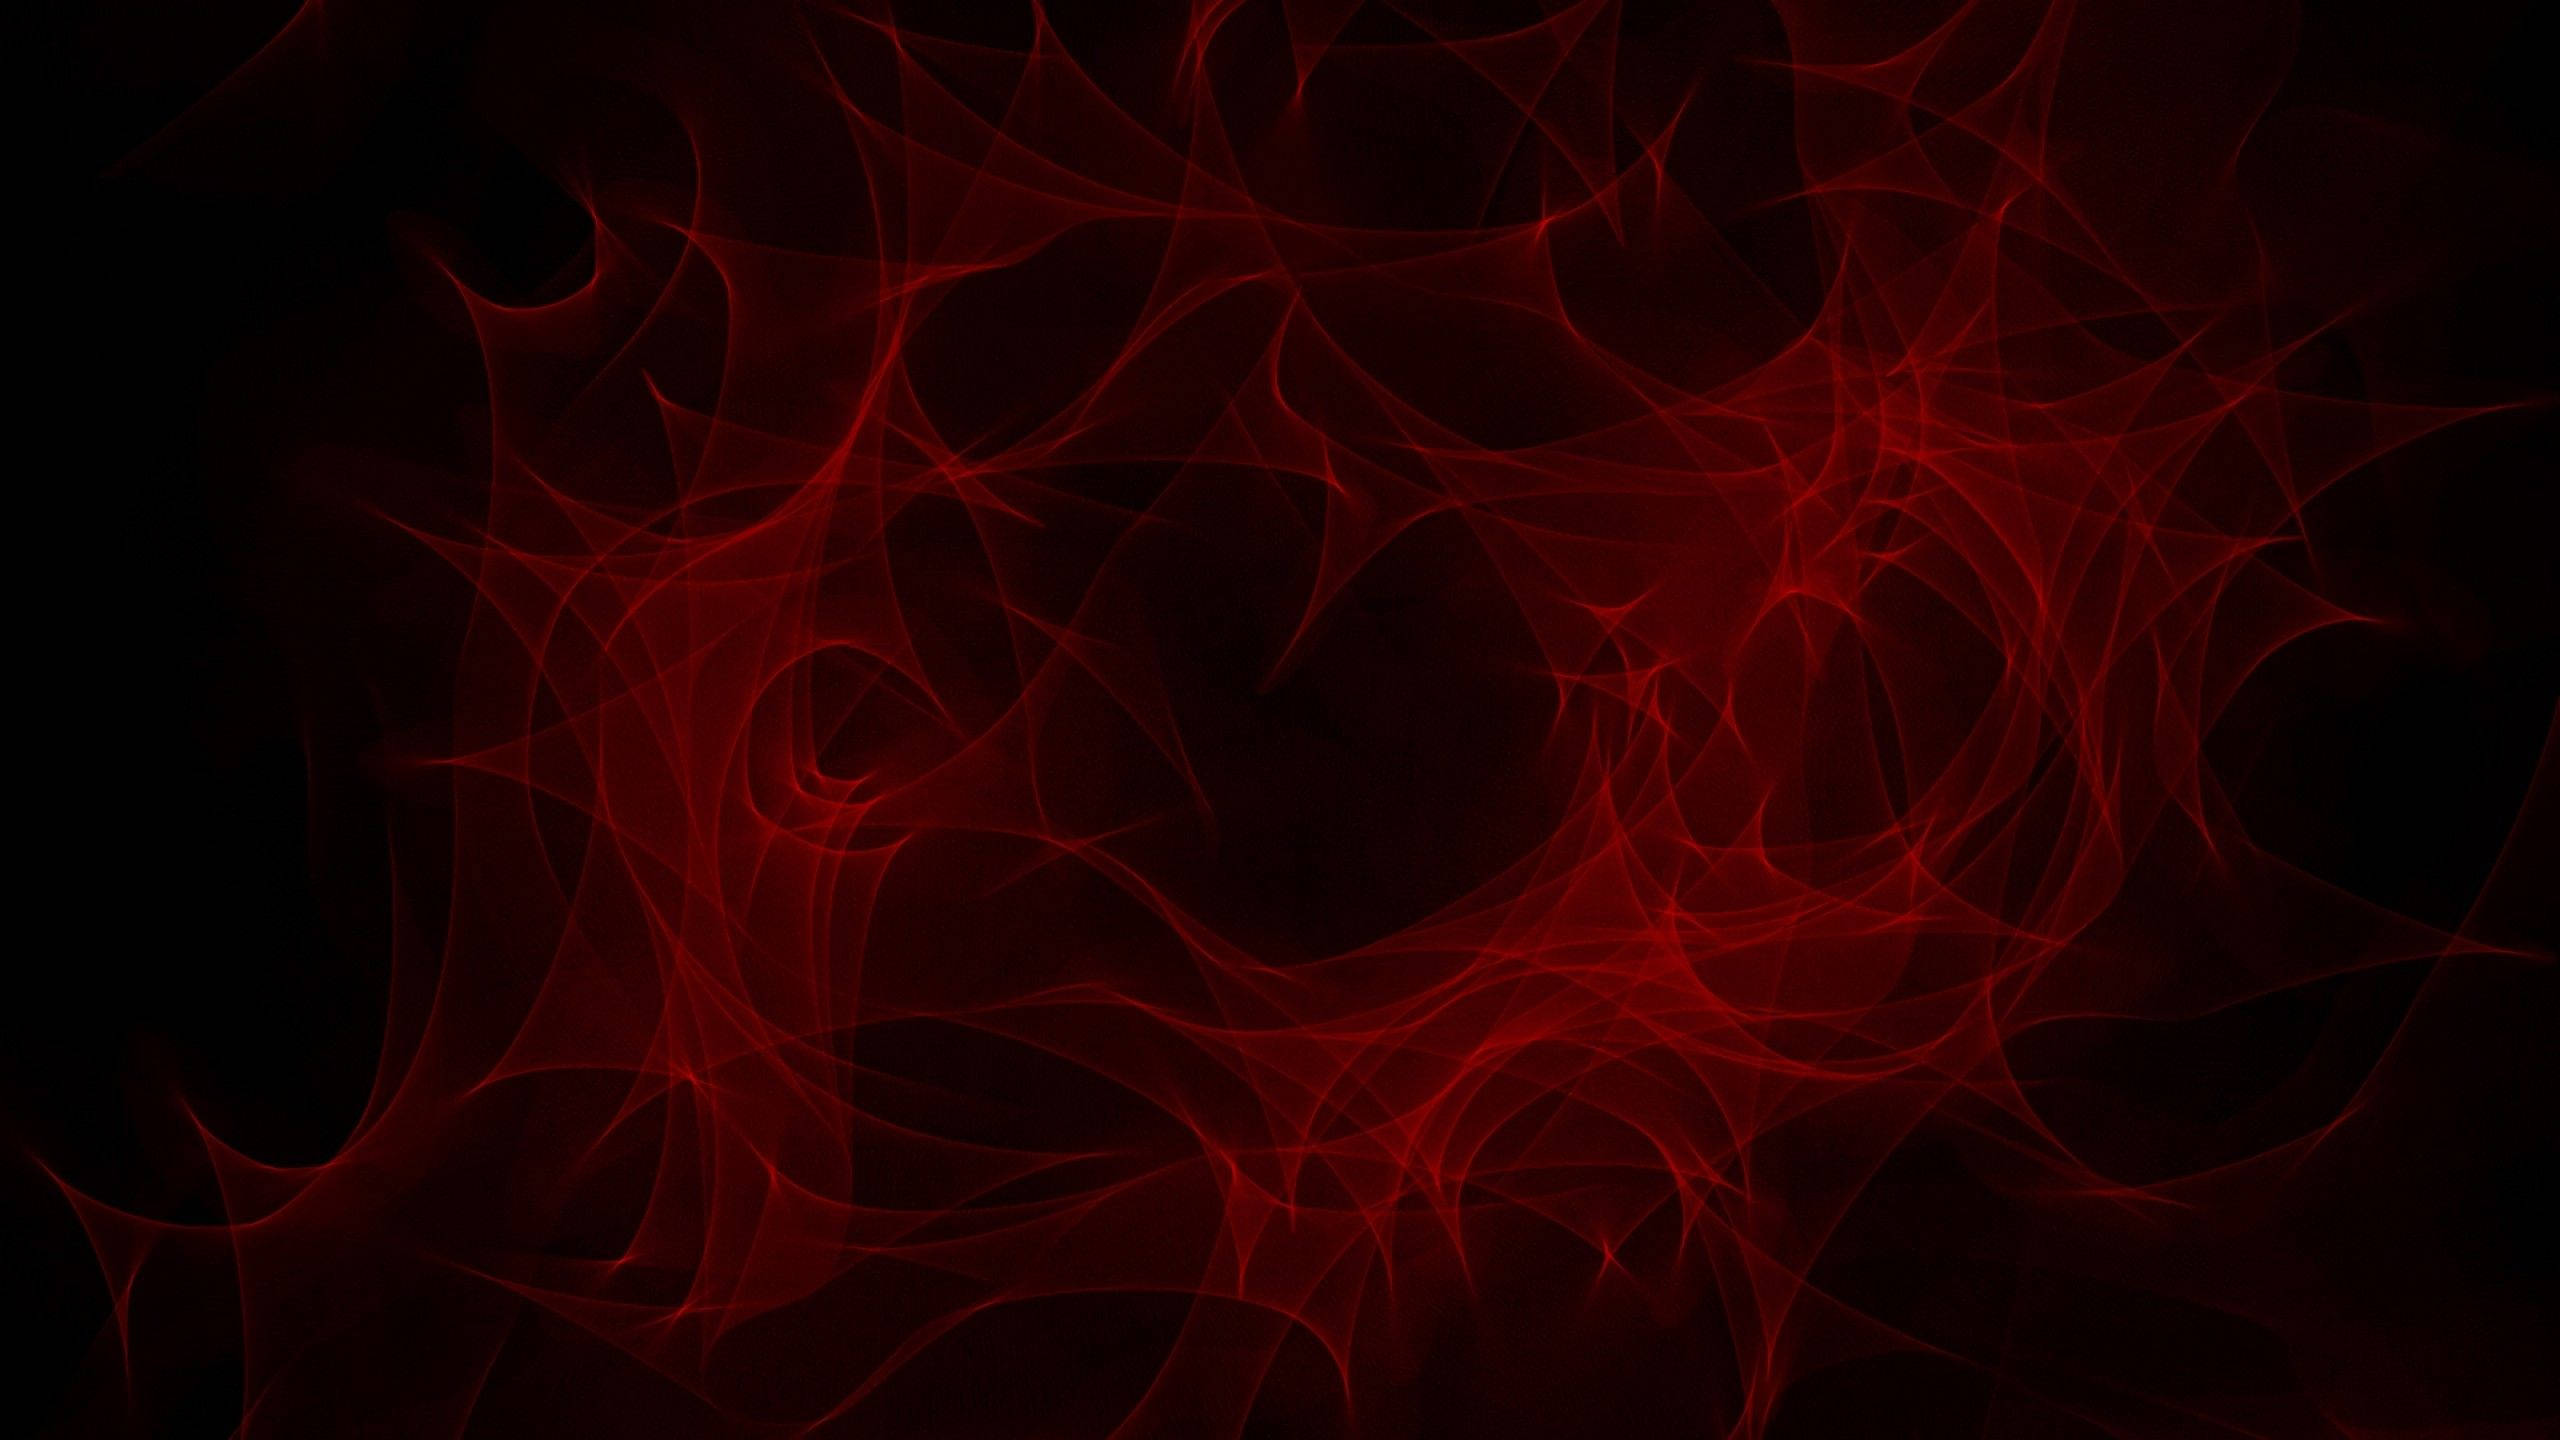 Vibrant Red And Black Youtube Cover Image Background